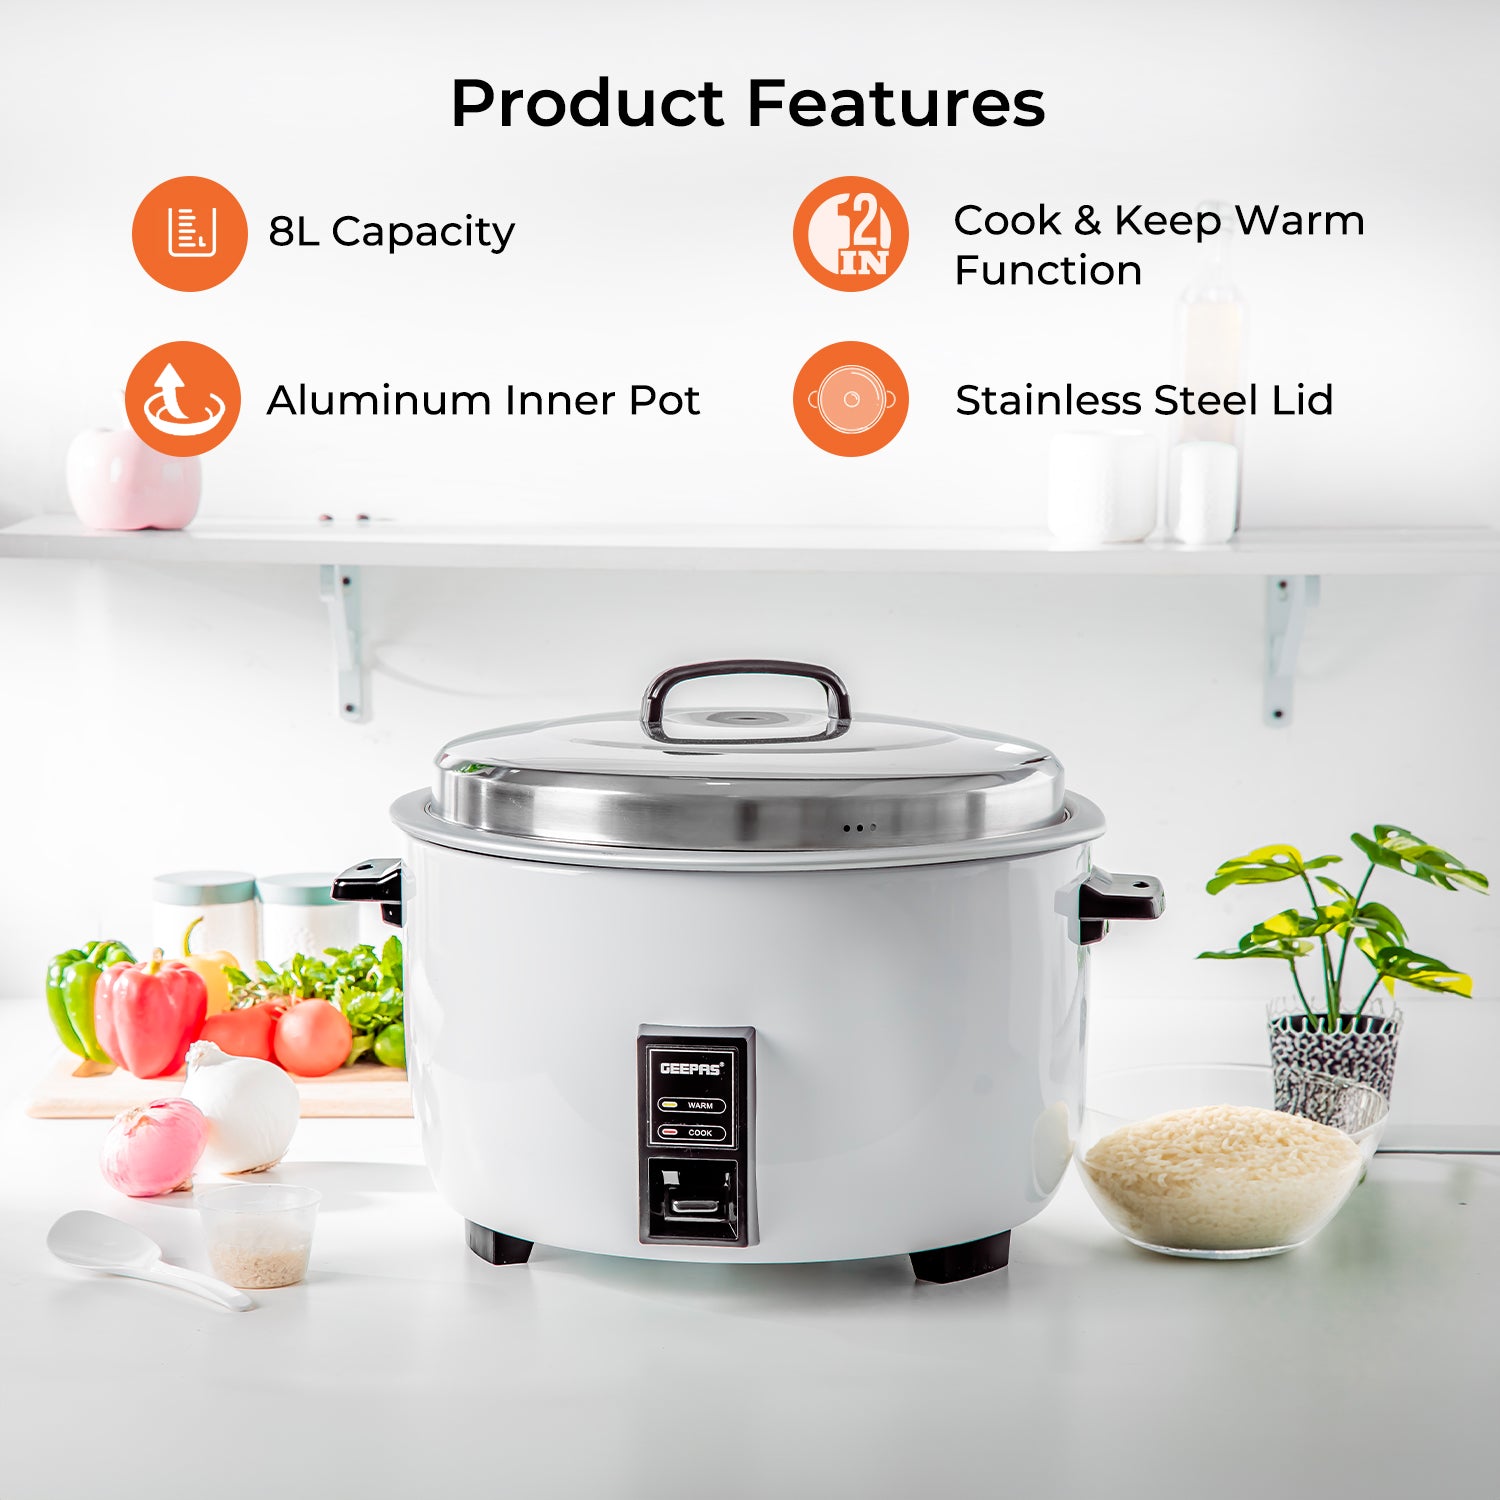 8L Stainless Steel Automatic Rice Cooker and Steamer